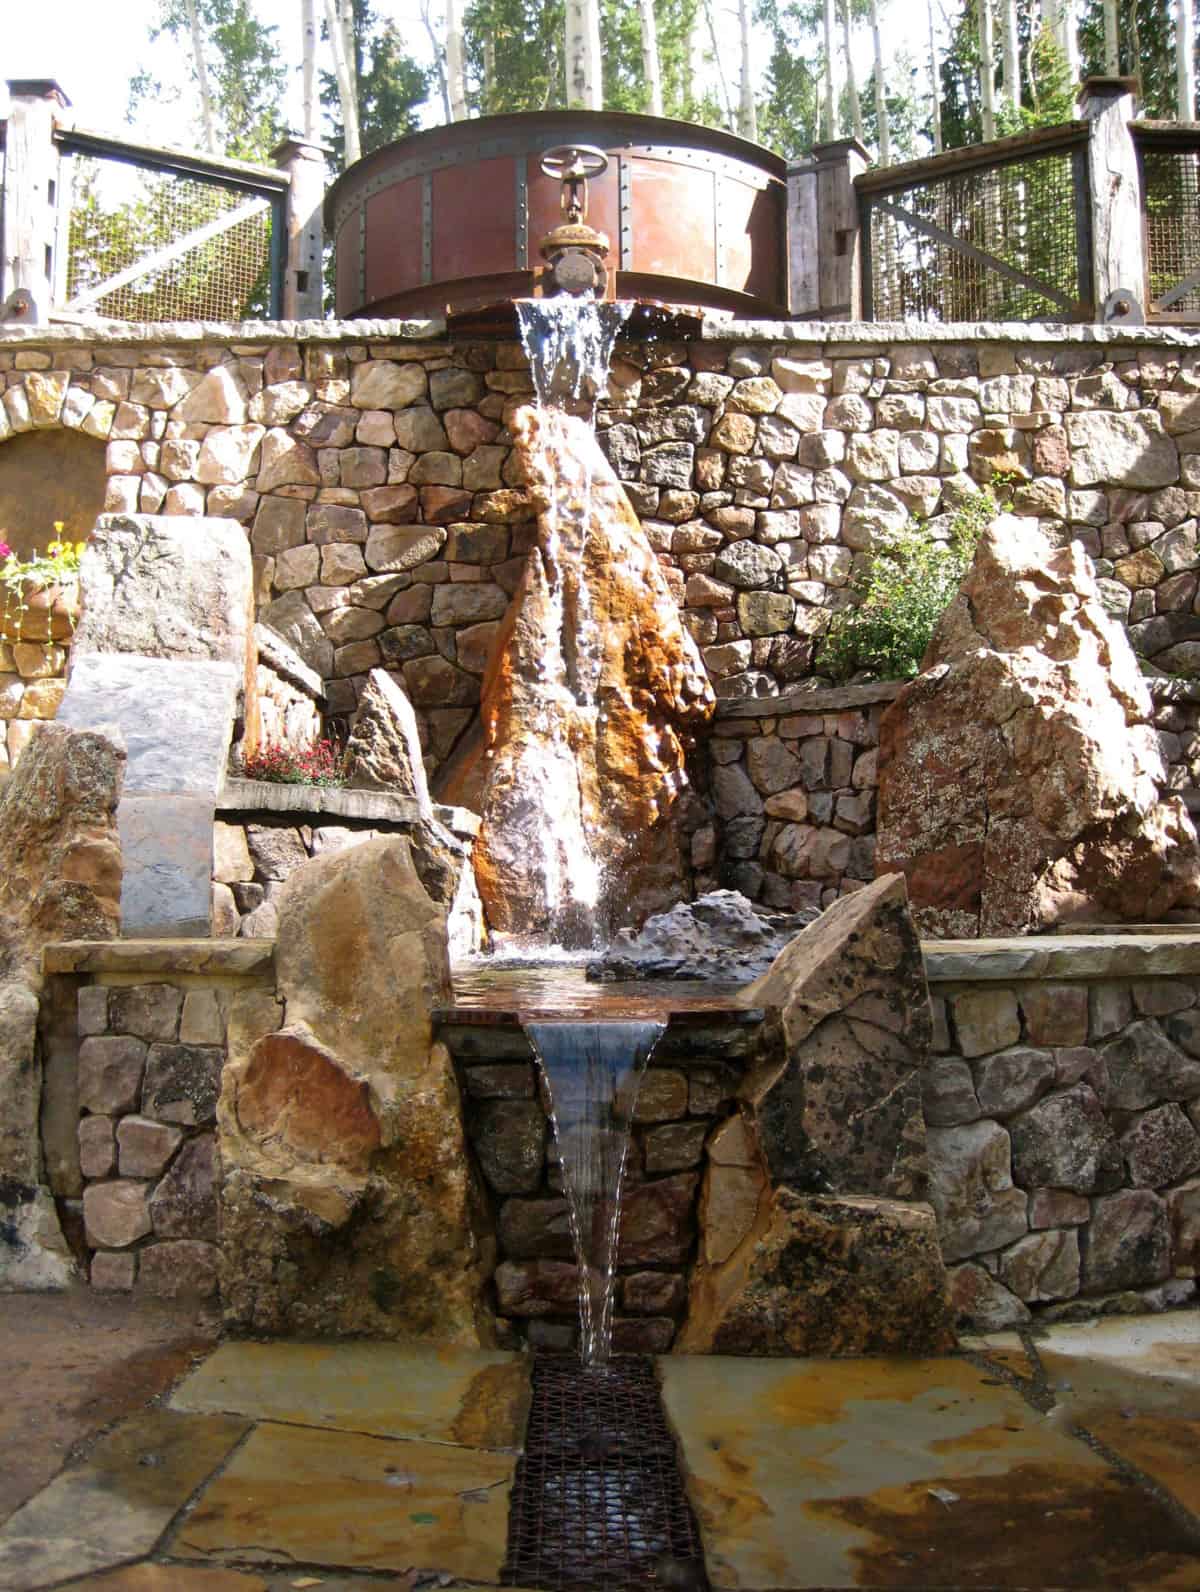 rustic-patio-with-a-water-feature